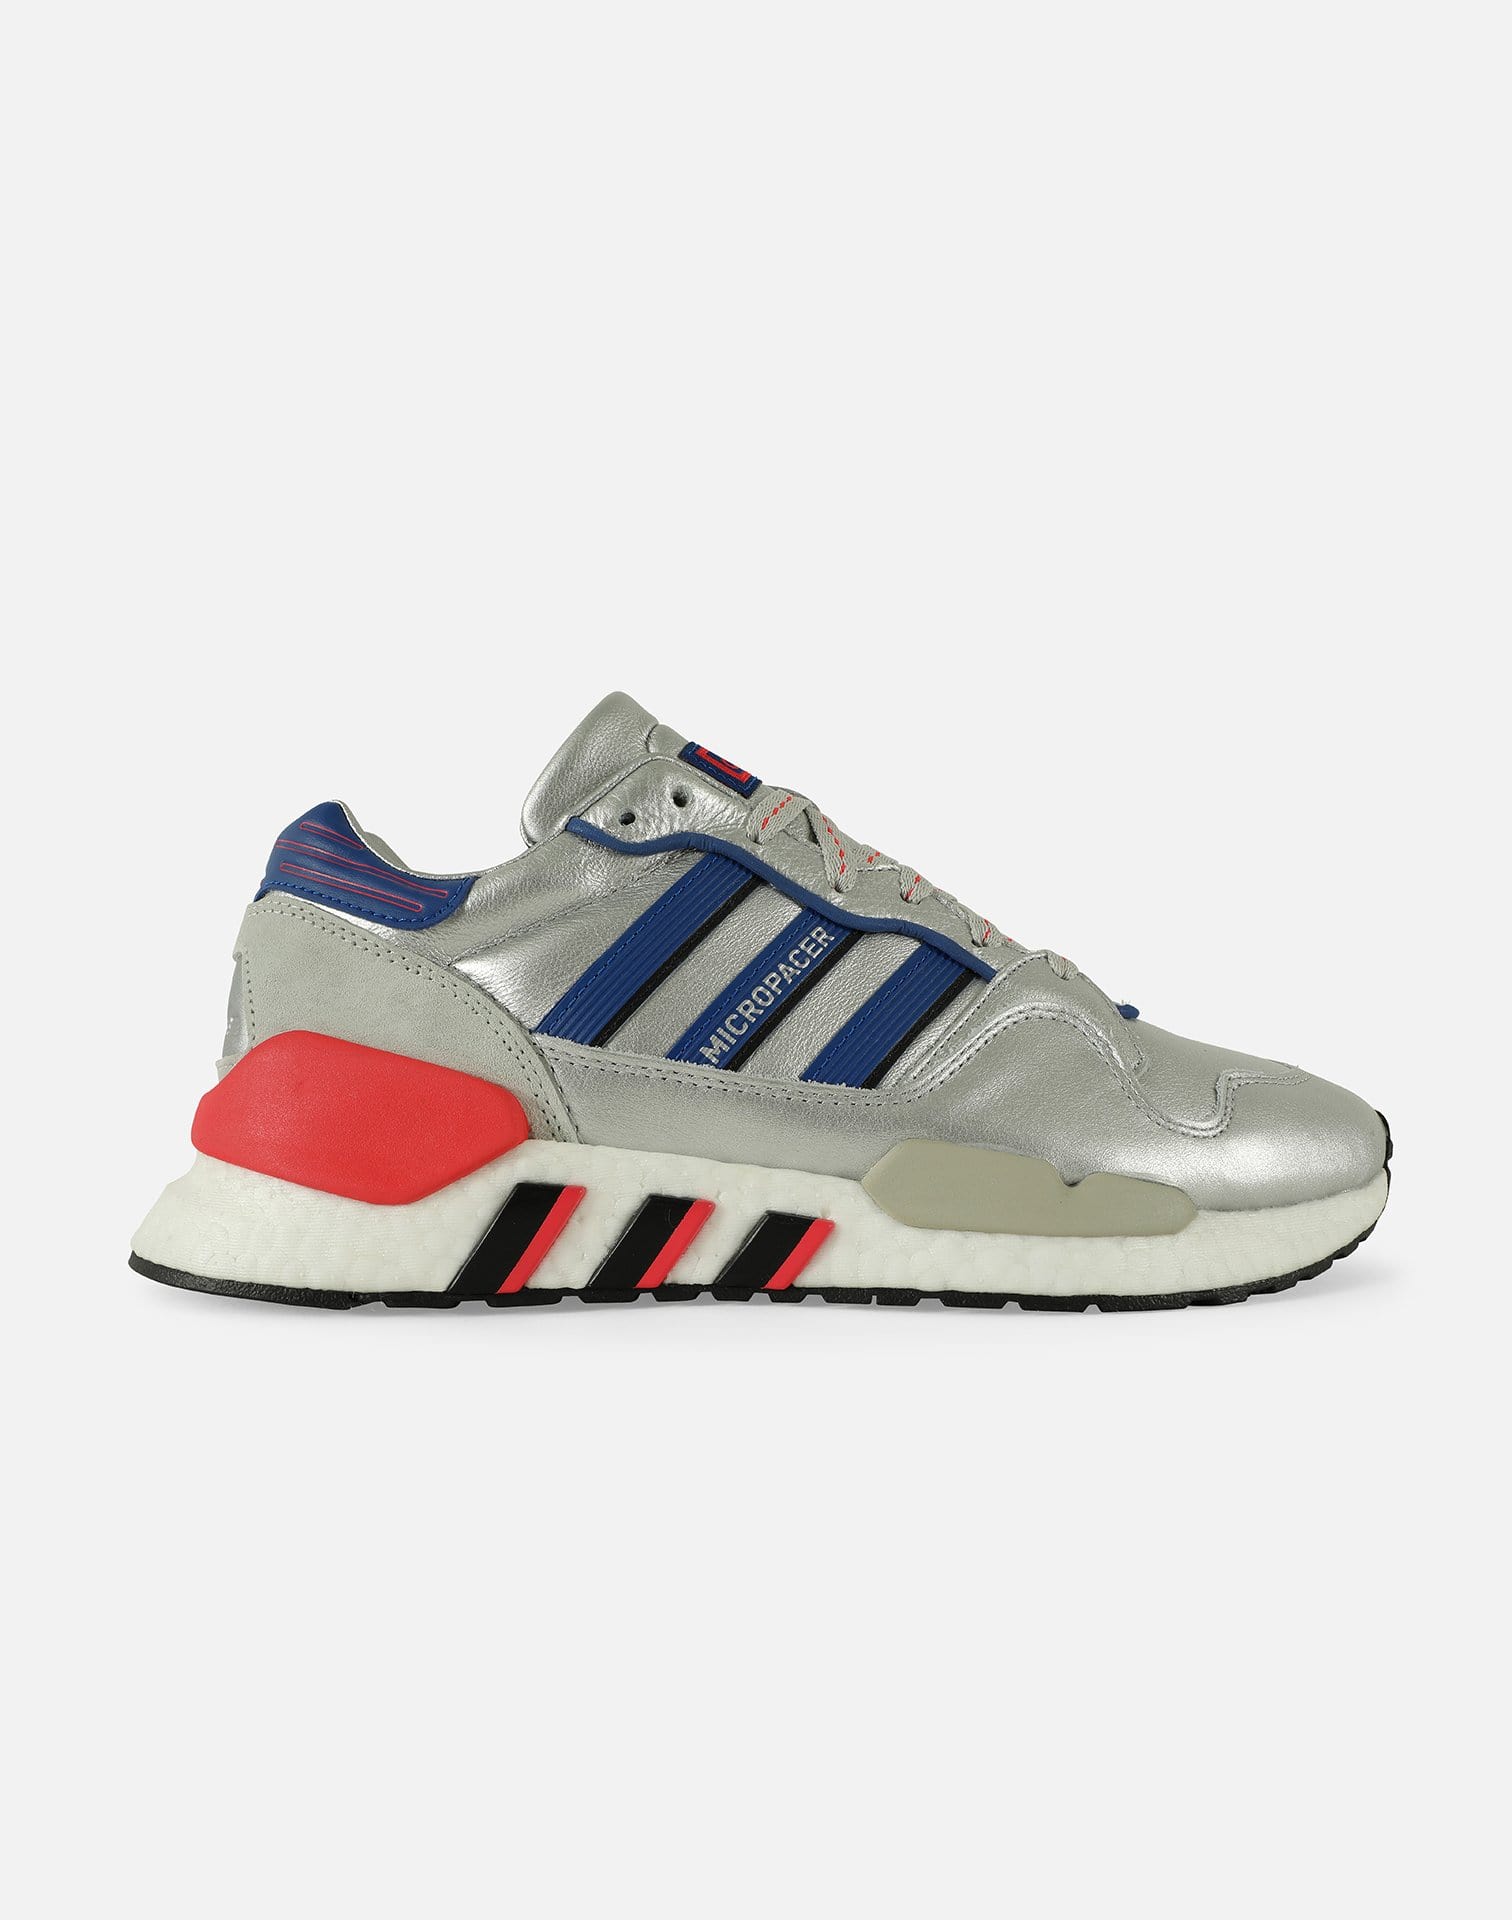 Adidas ZX 930 EQT 'MICROPACER'